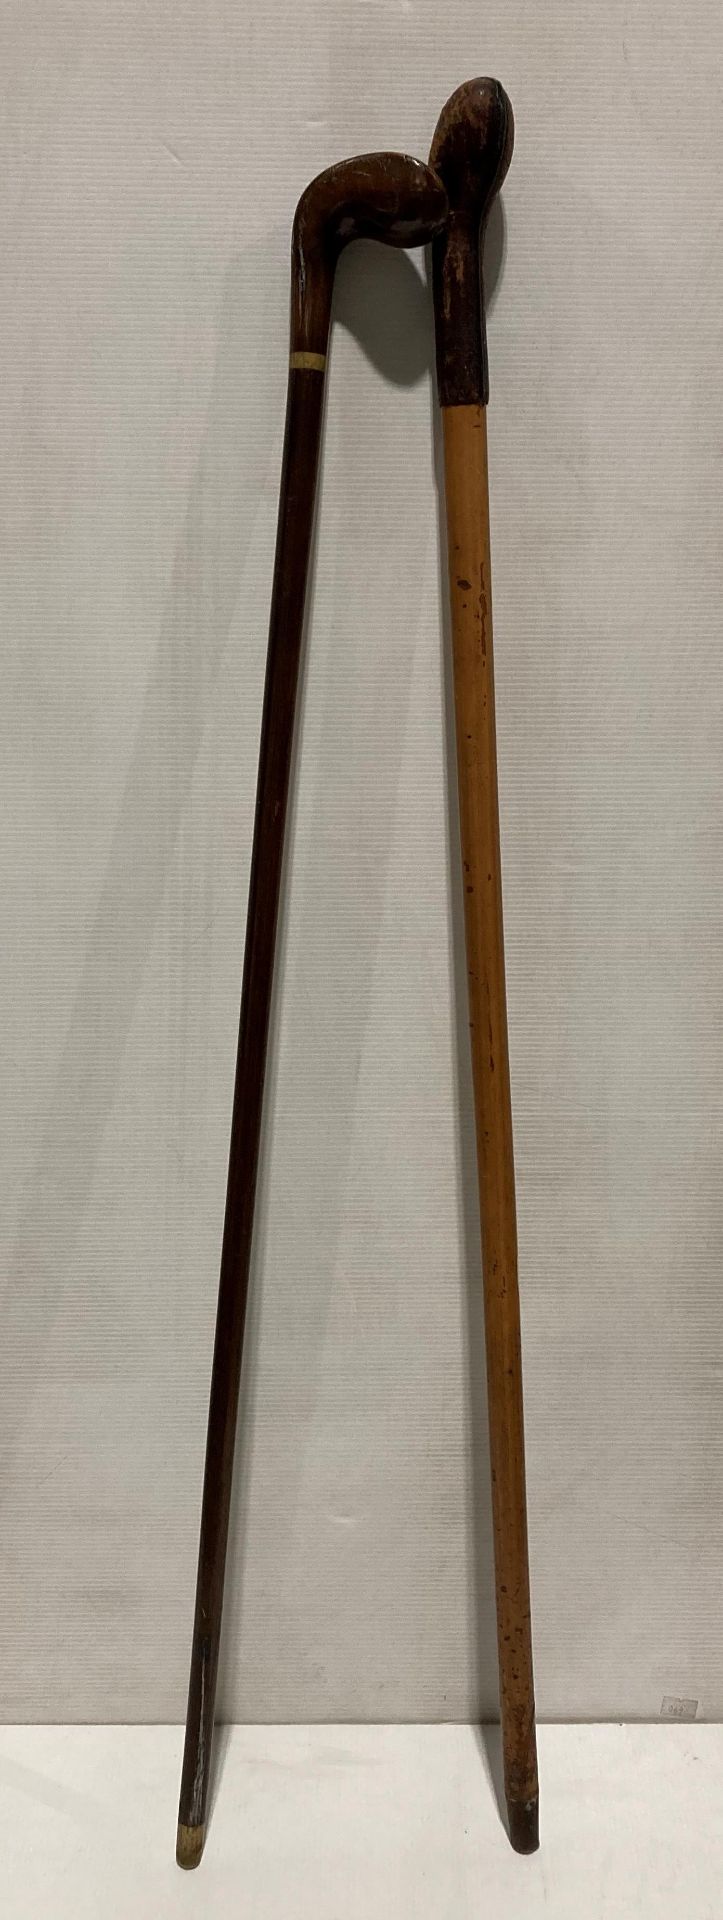 Two wooden walking sticks - one with leather bound handle (93cm long) and a right hand walking